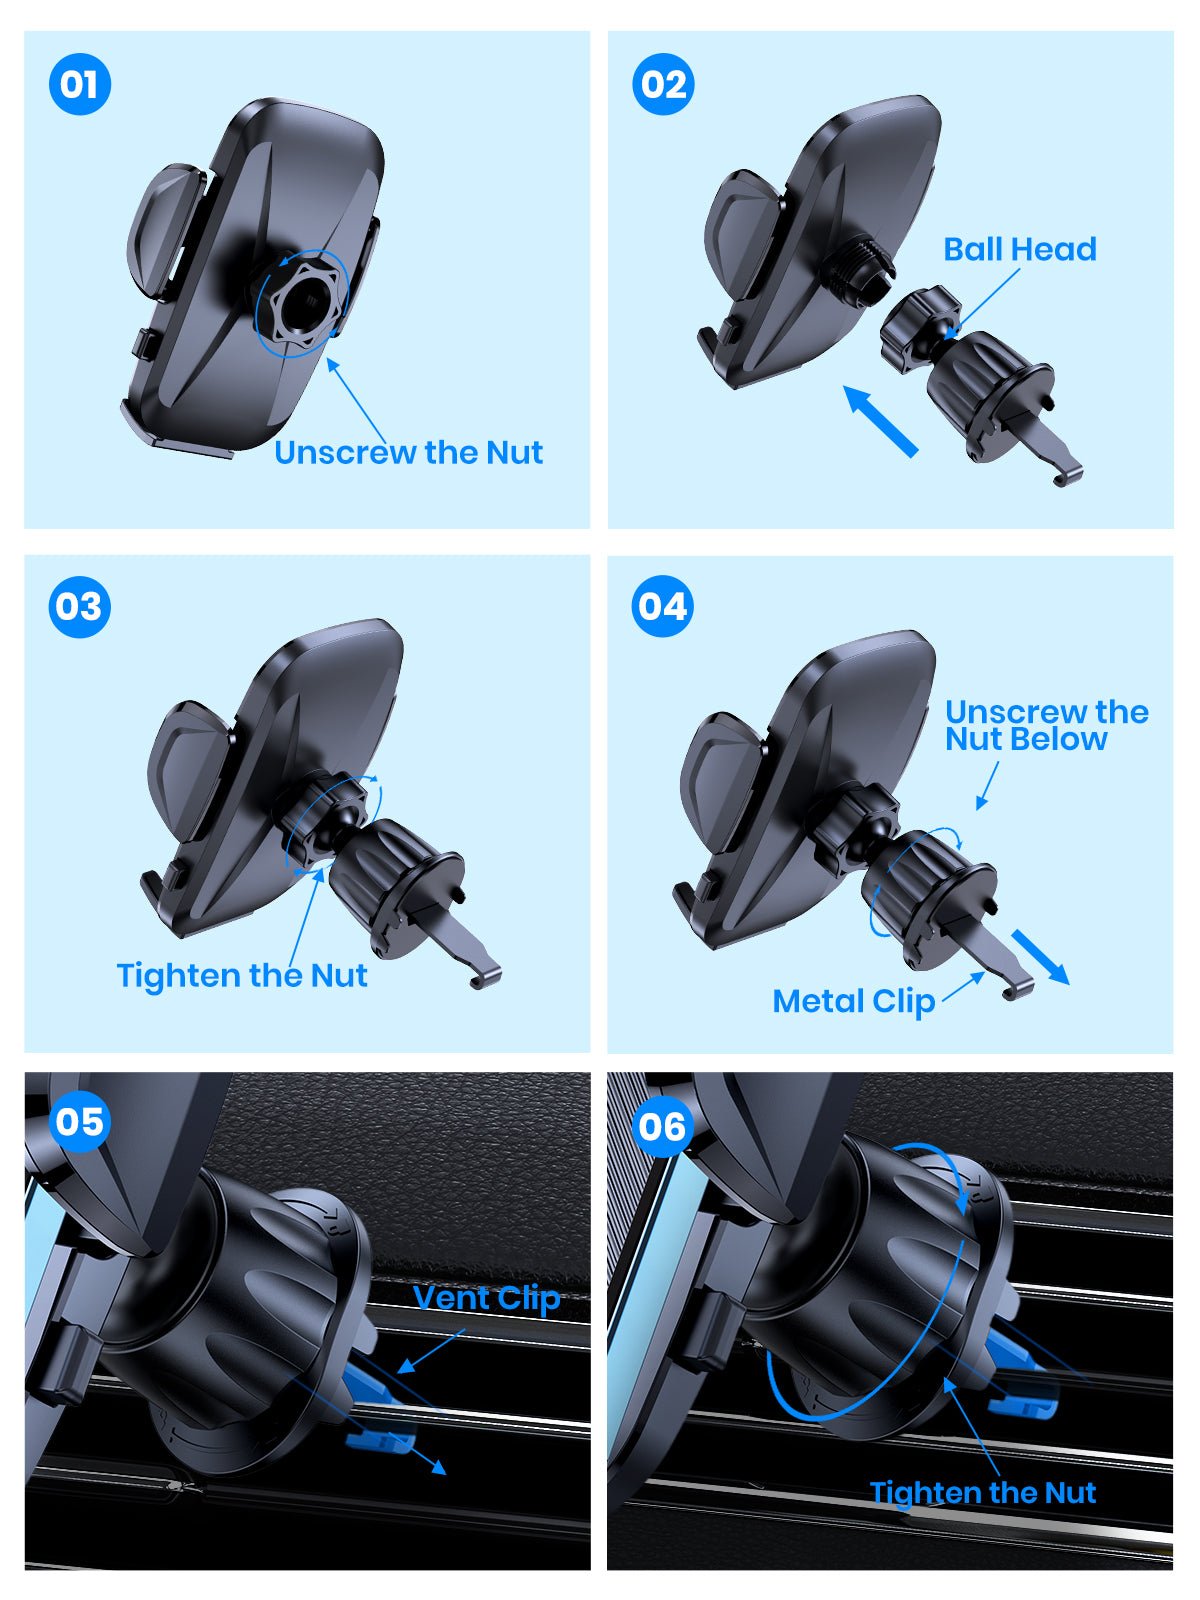 TOPK D37-X Universal Car Phone Holder - Drive Safe and Smart with